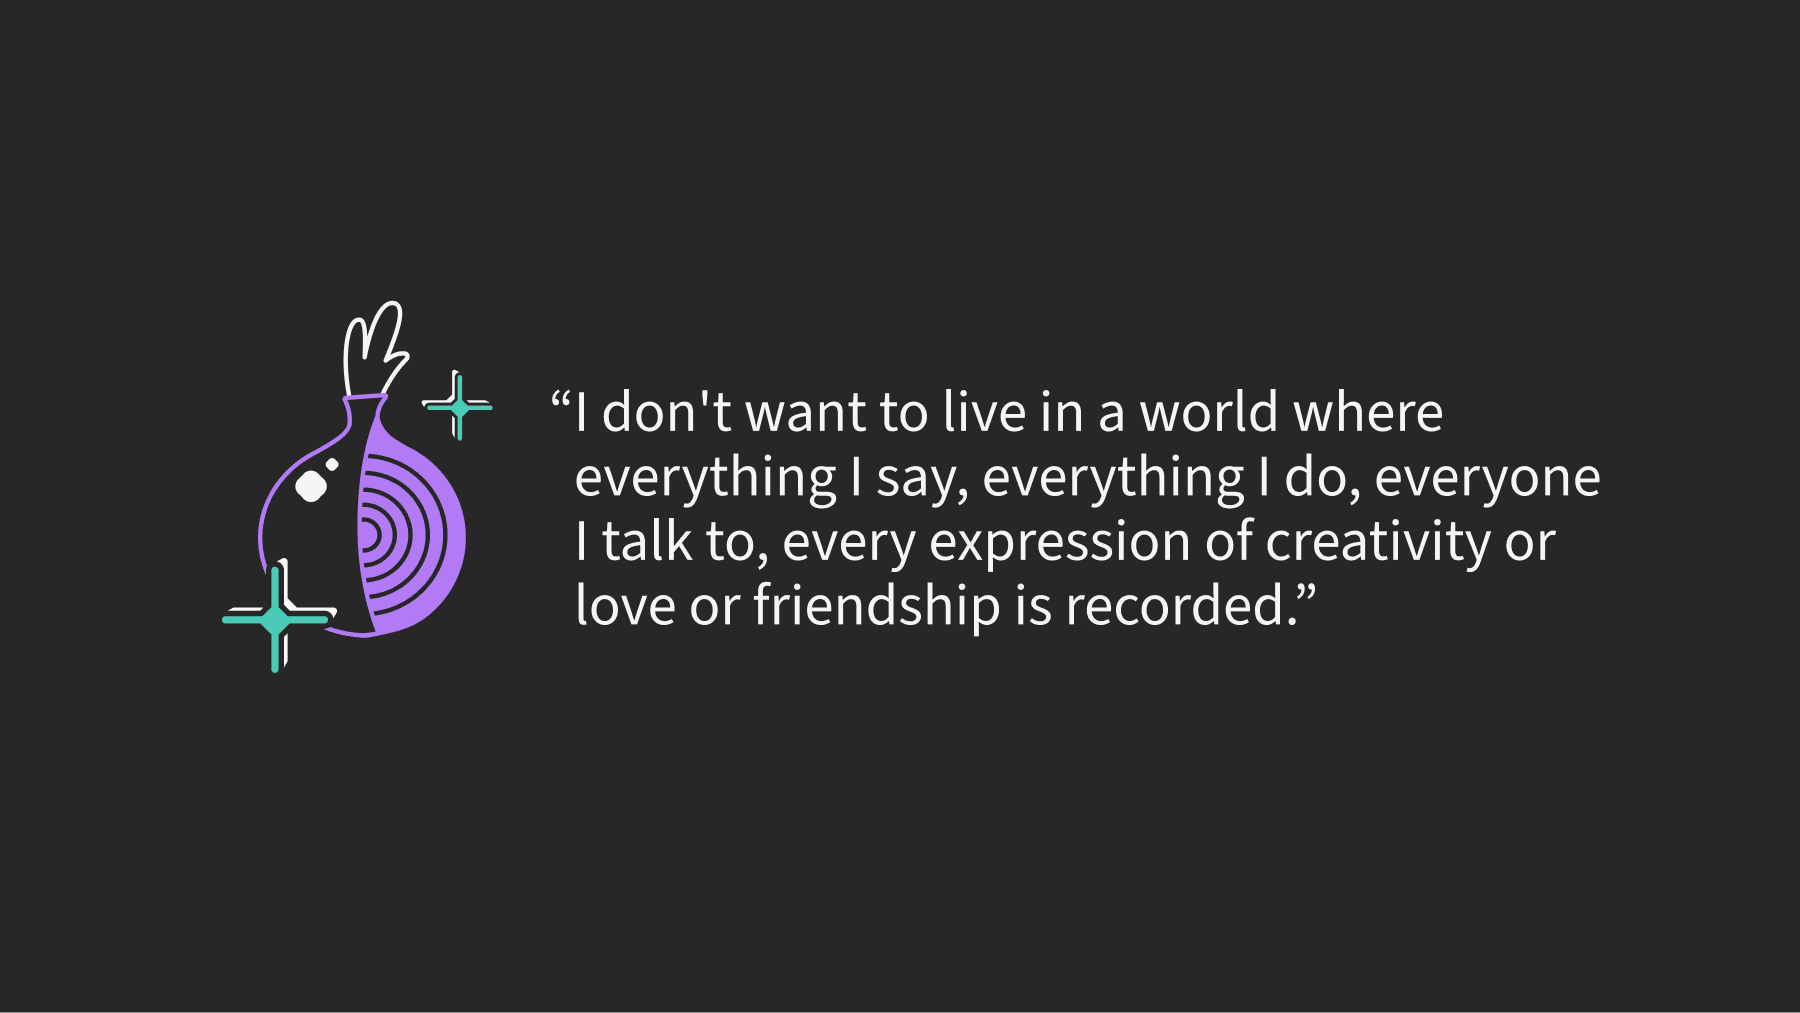 User quote: "I don't want to live in a world where everything I say, everything I do, everyone I talk to, every expression of creativity or love or friendship is recorded.
Thank you, Tor Project."